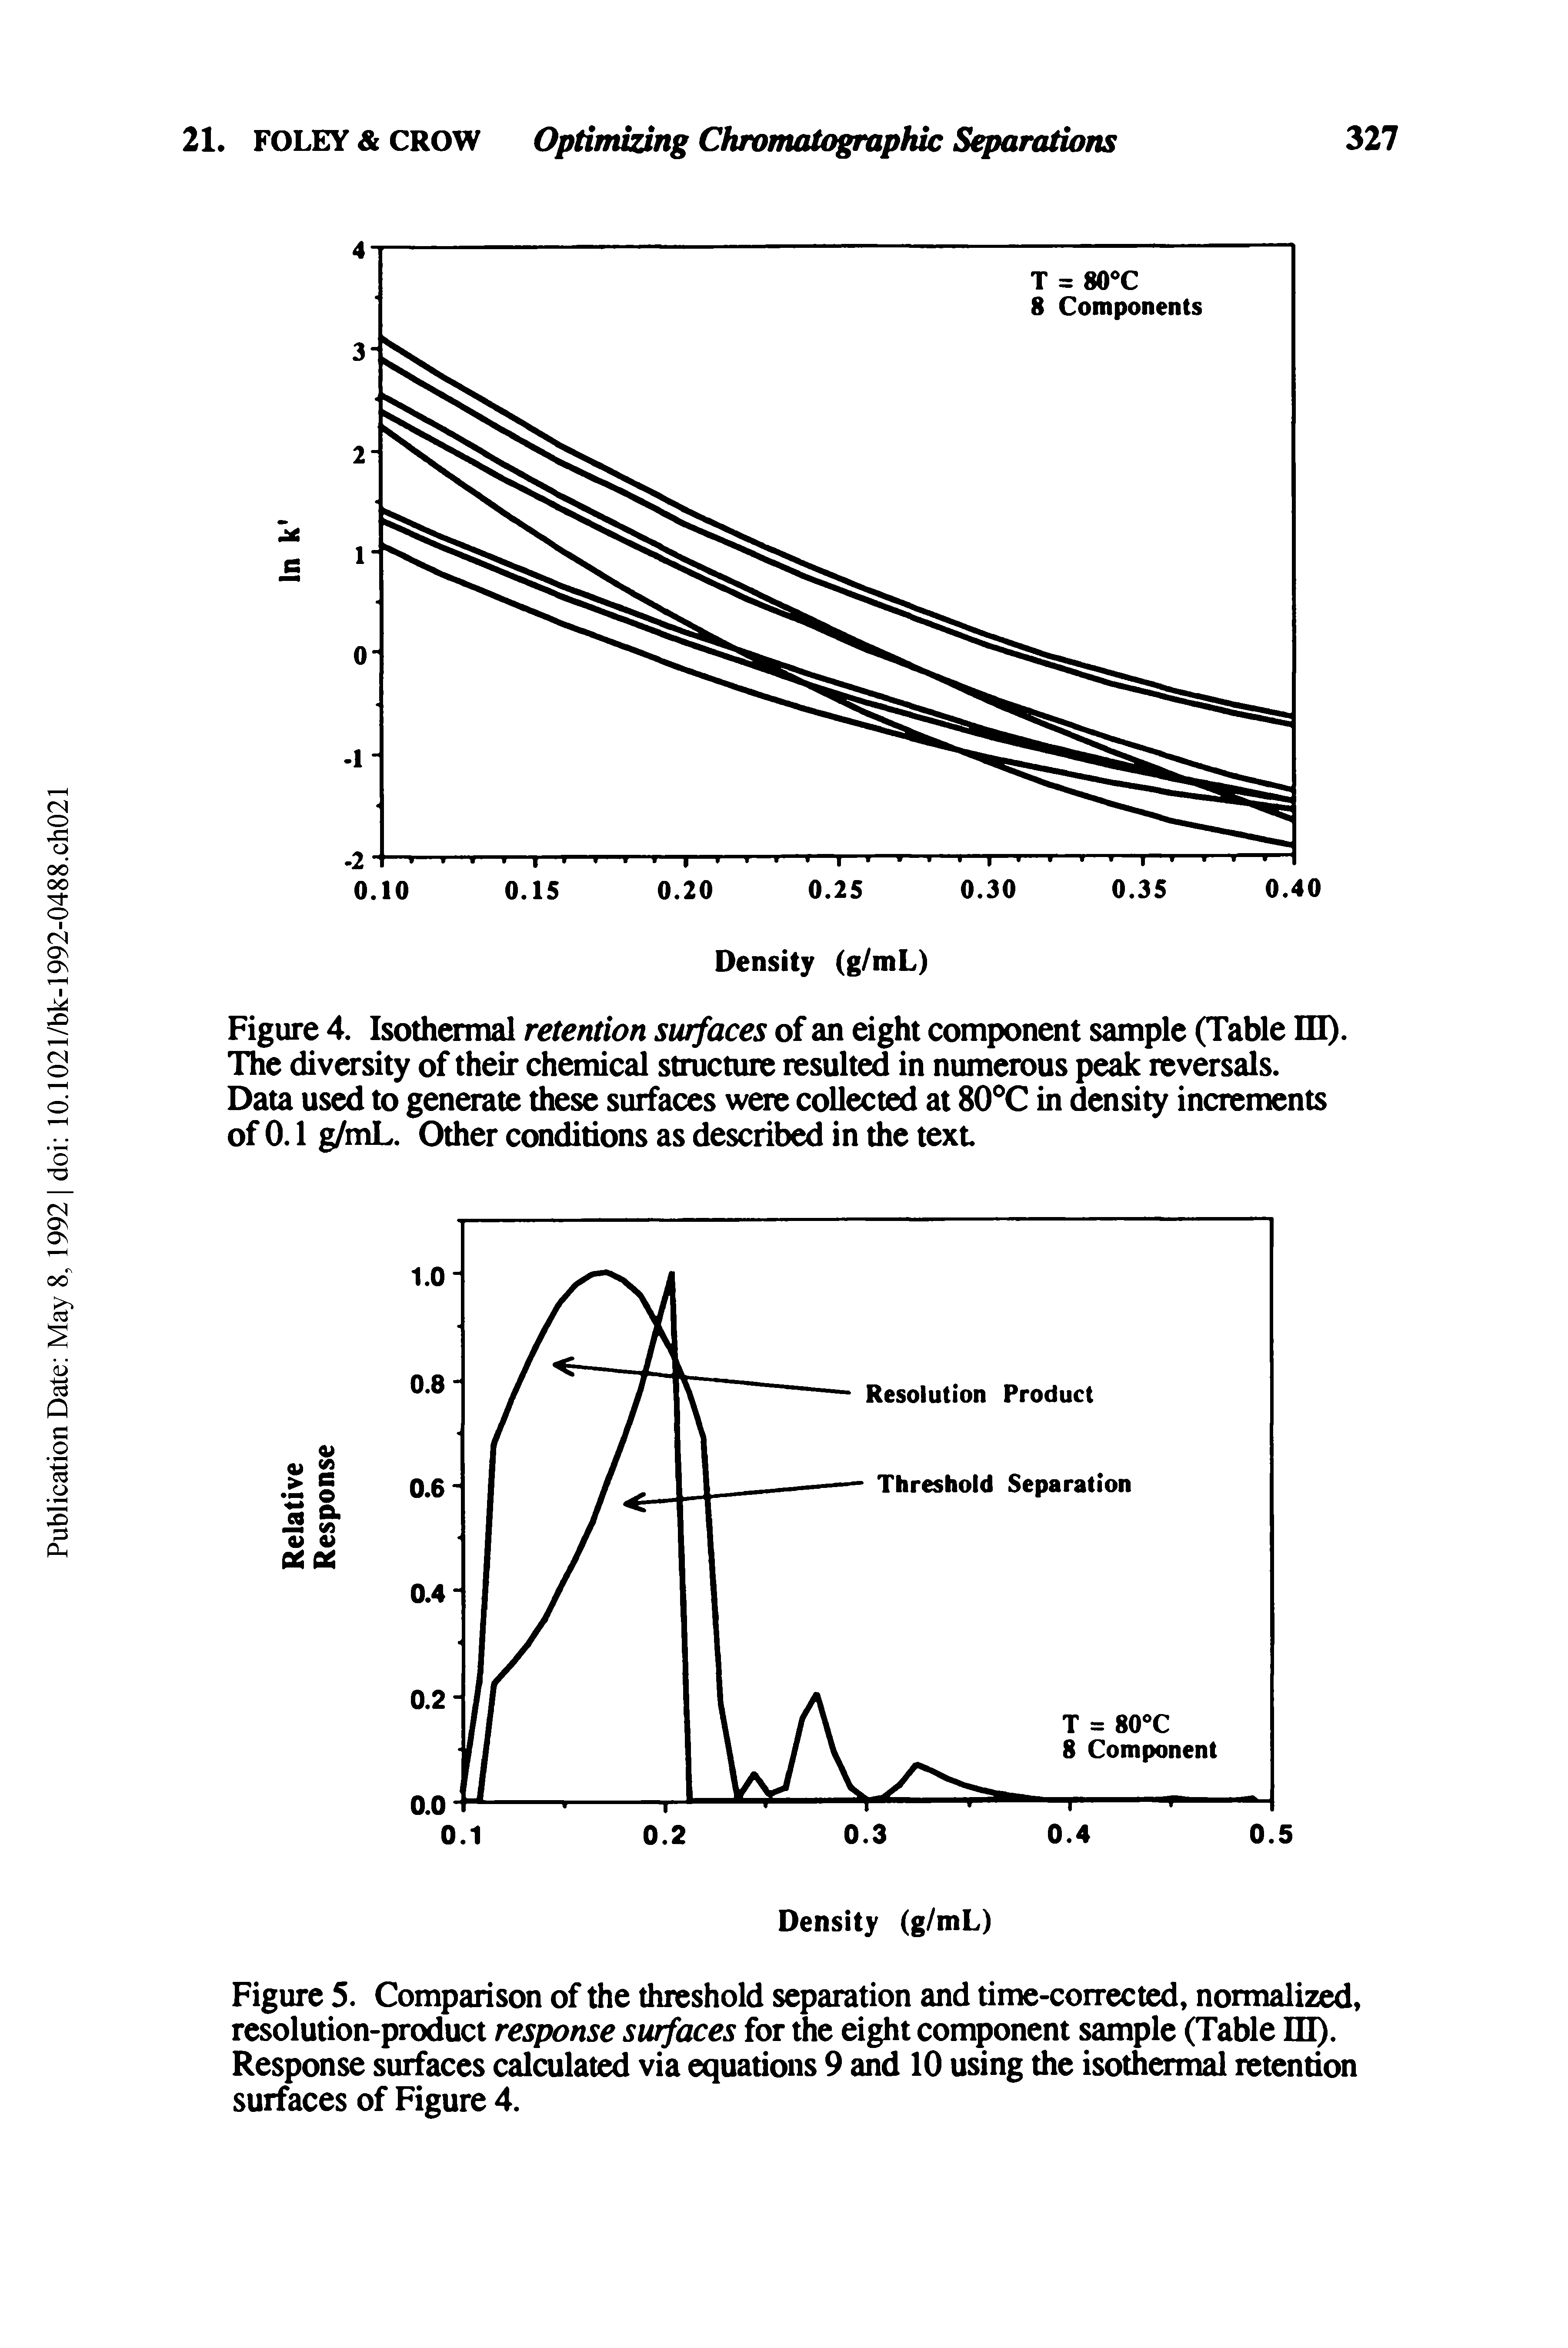 Figure 4. Isothermal retention surfaces of an eight component sample (Table HI). The diversity of their chemical structure resulted in numerous peak reversals.